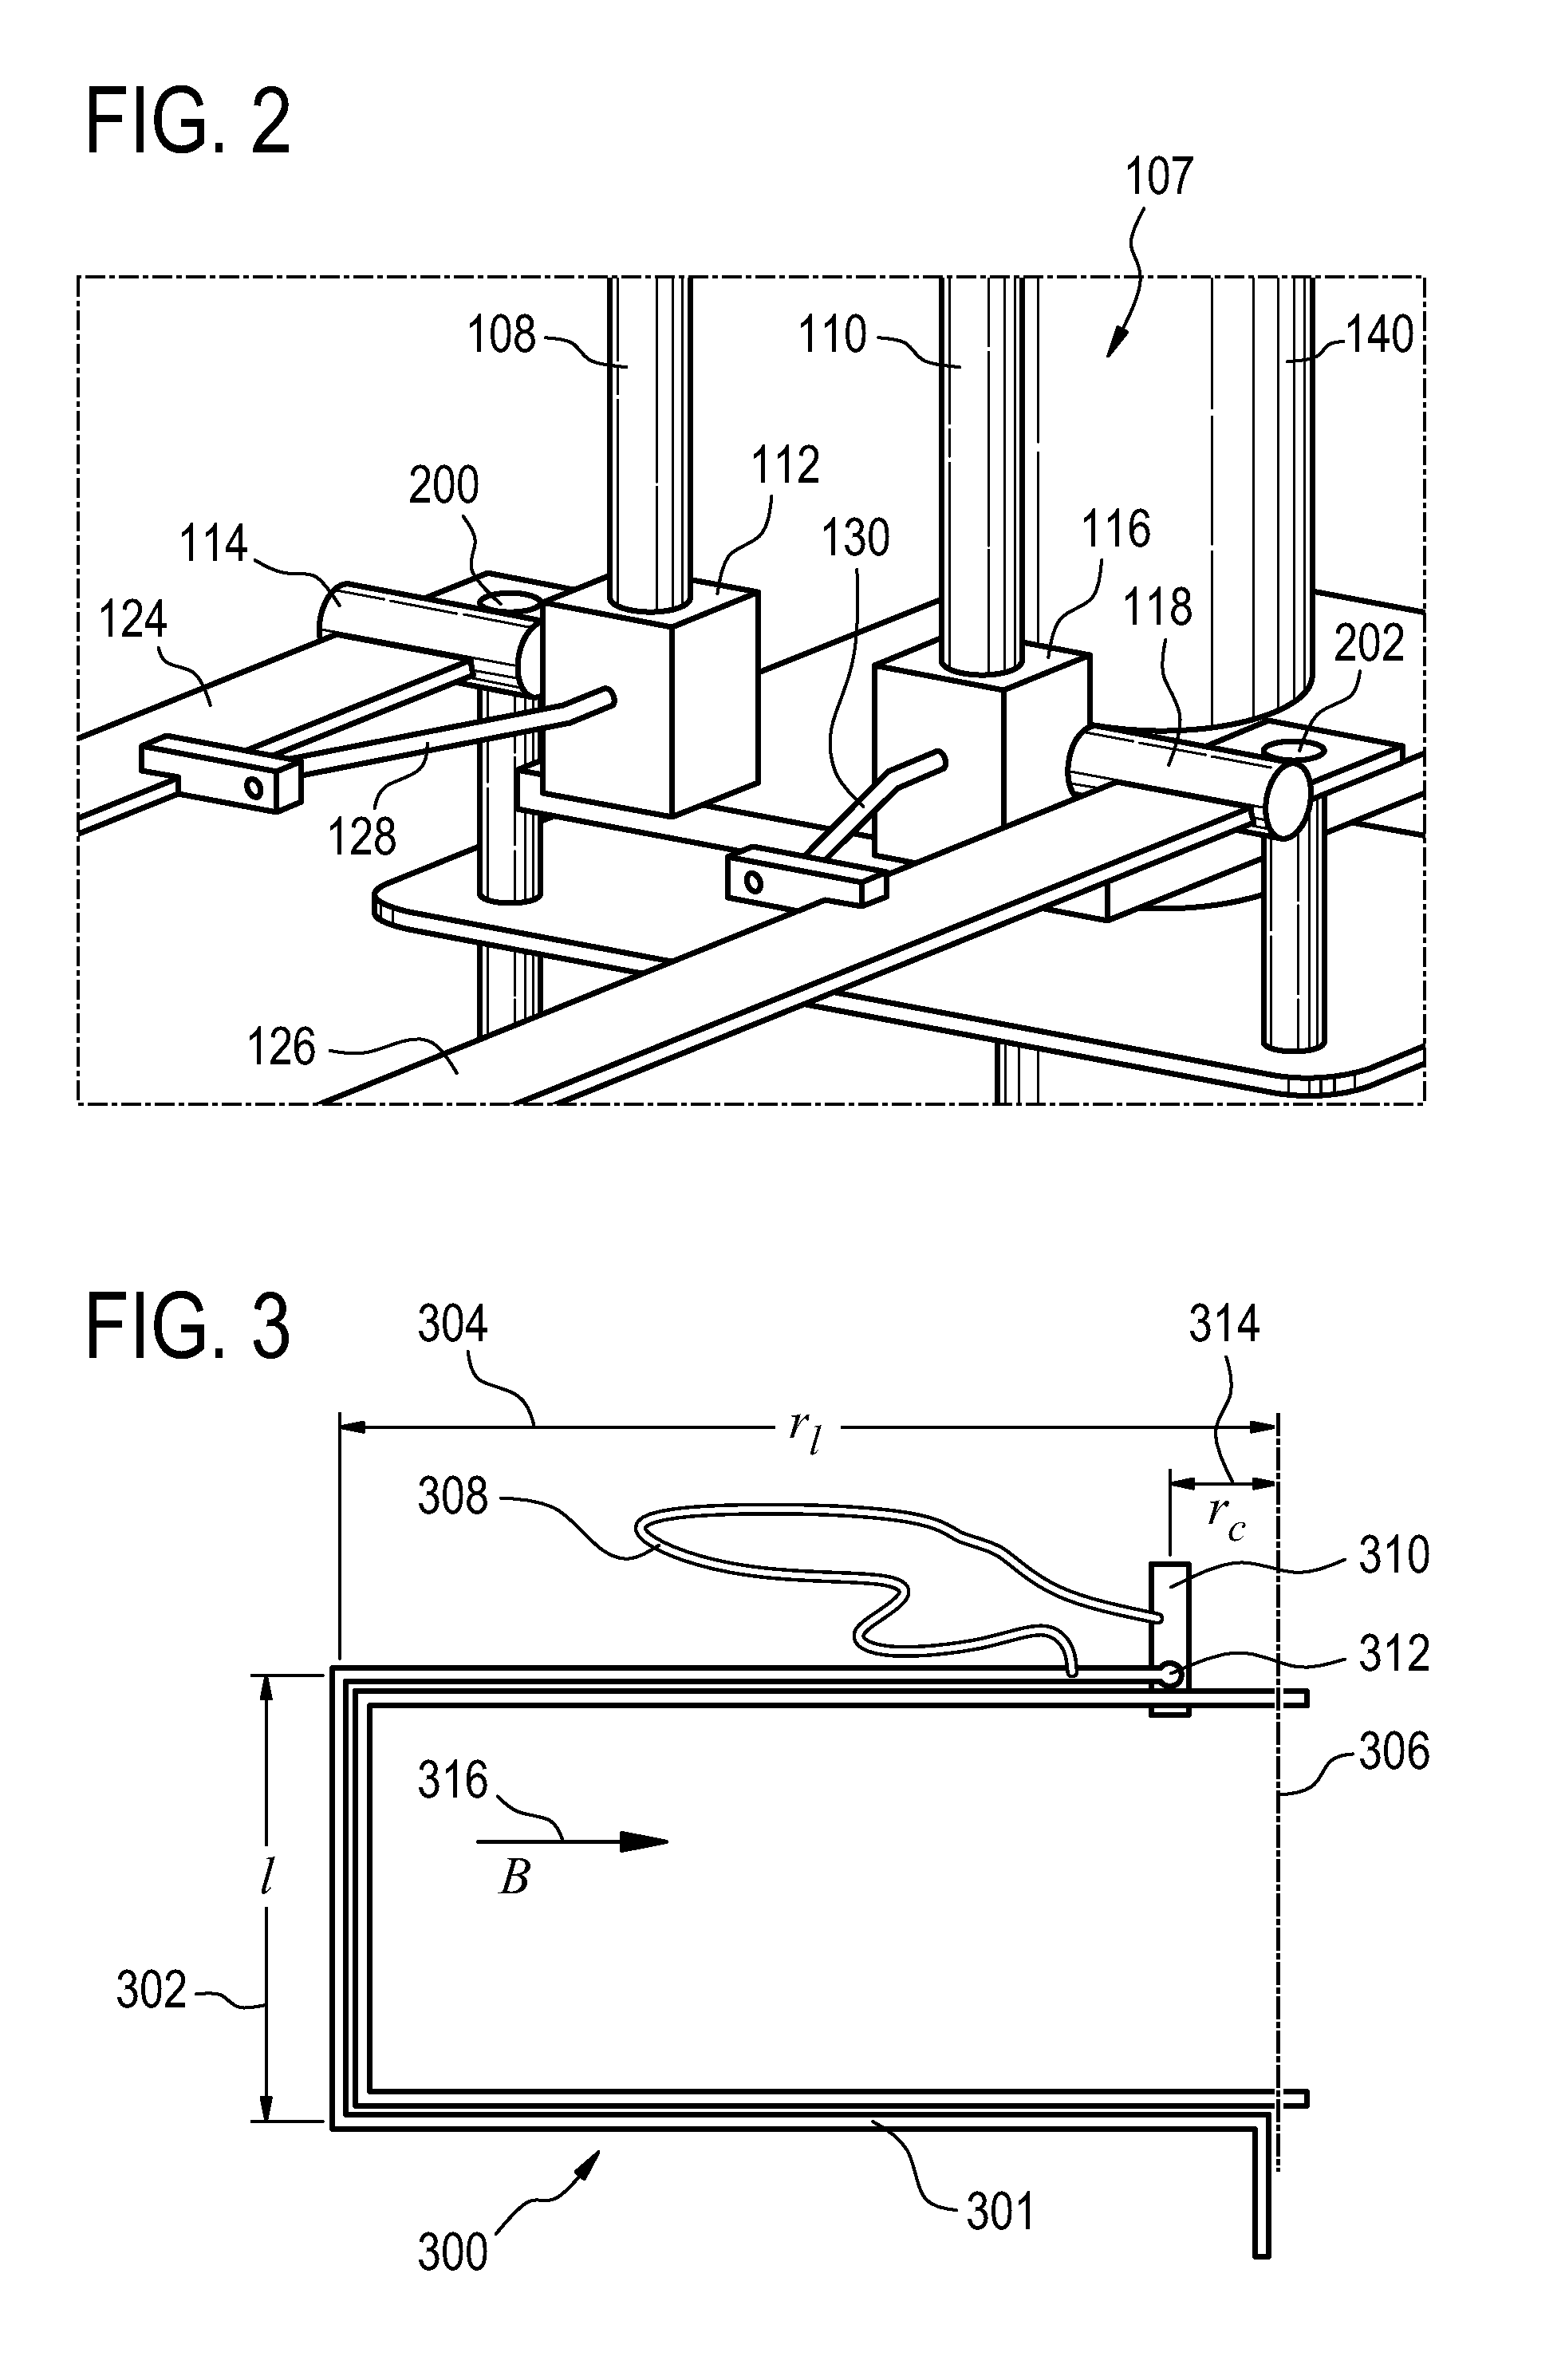 Automatic current switching of current leads for superconducting magnets